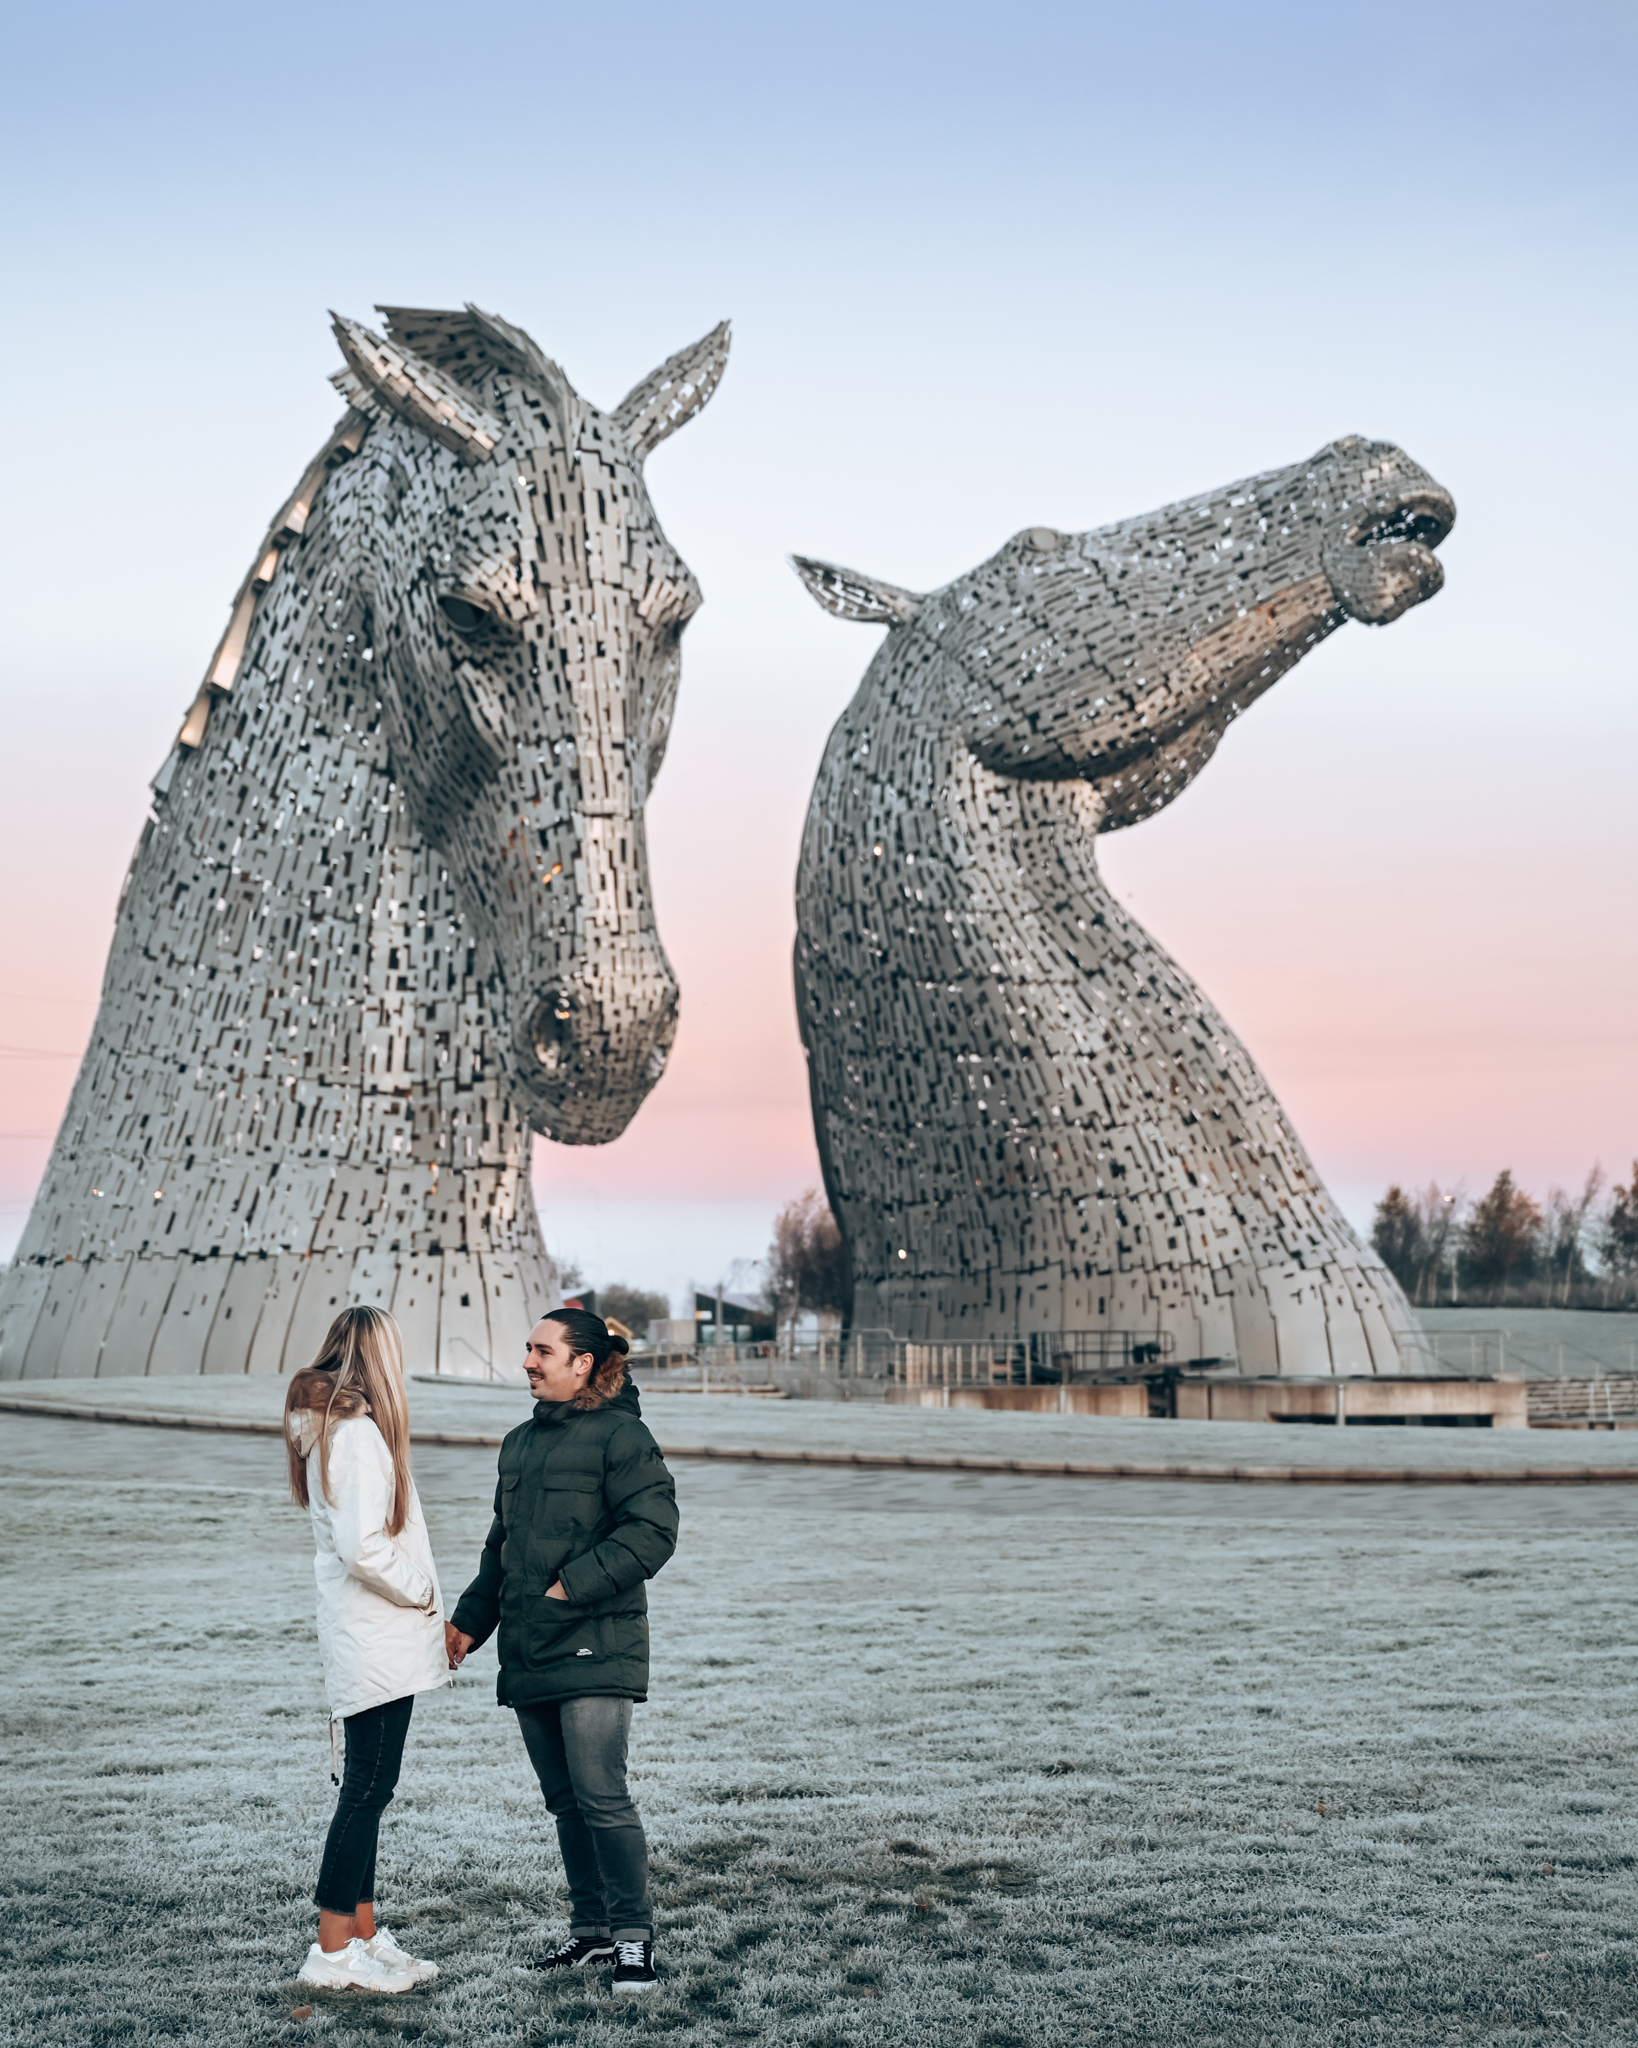 quirky places to visit scotland